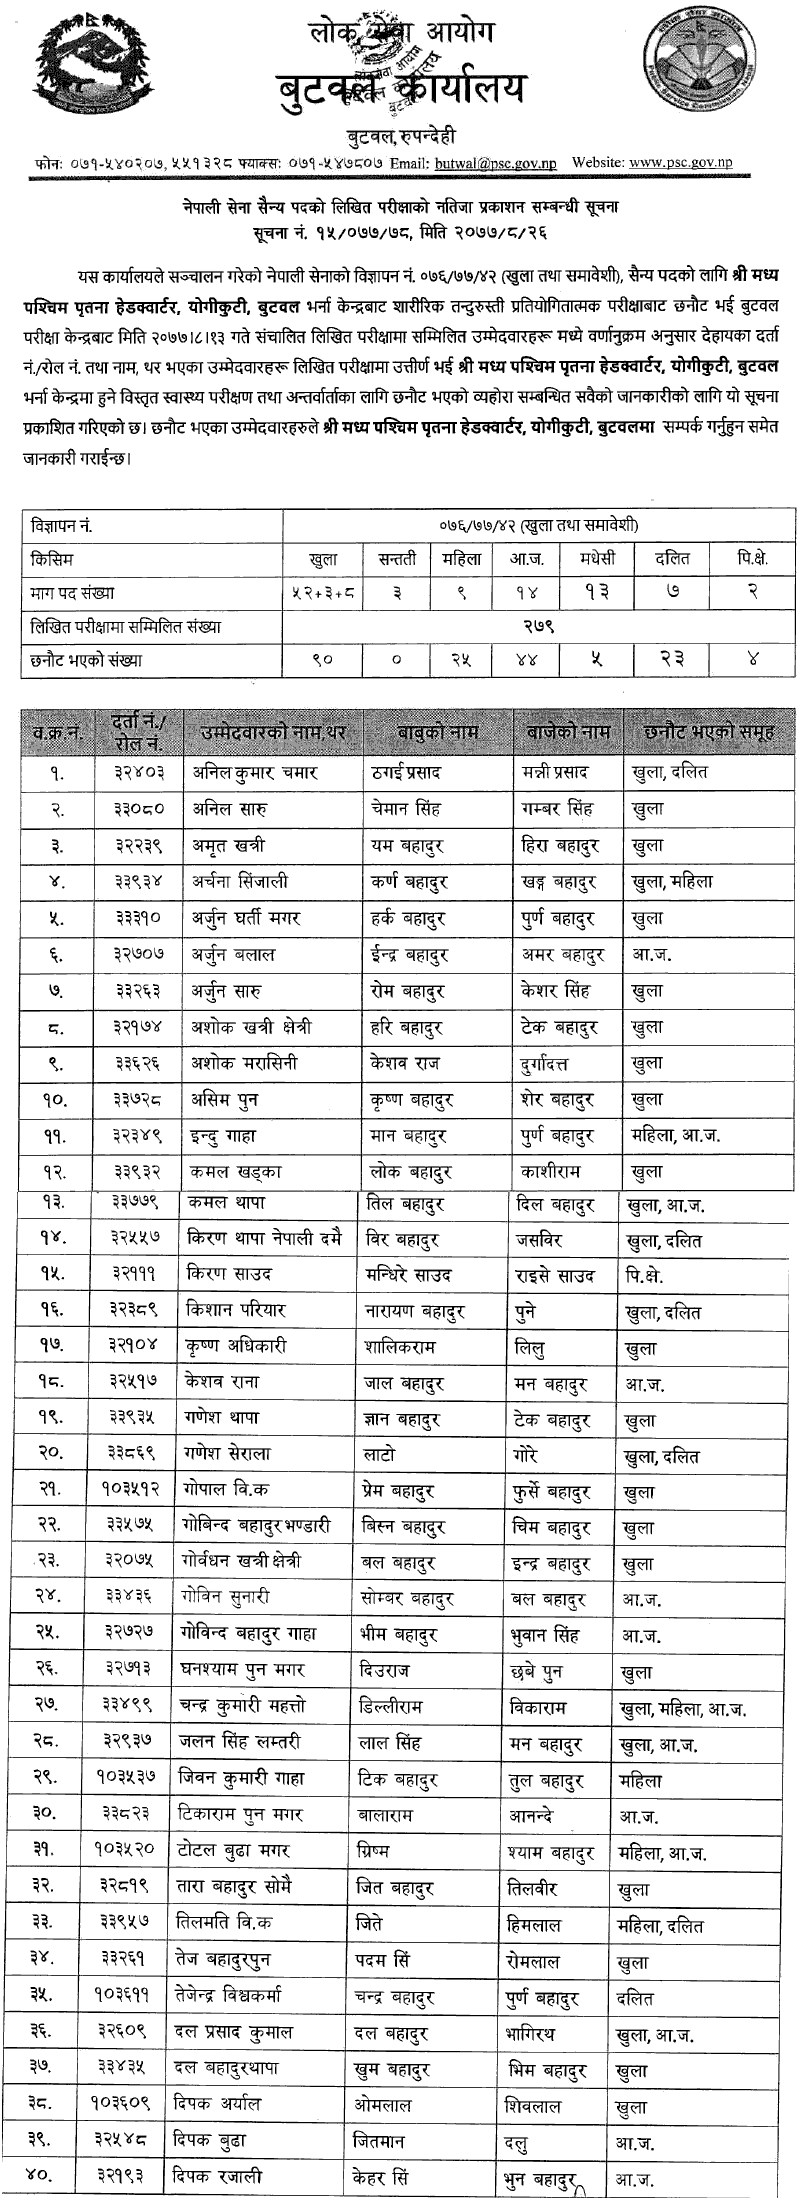 Nepal Army Butwal Military Post Written Exam Result